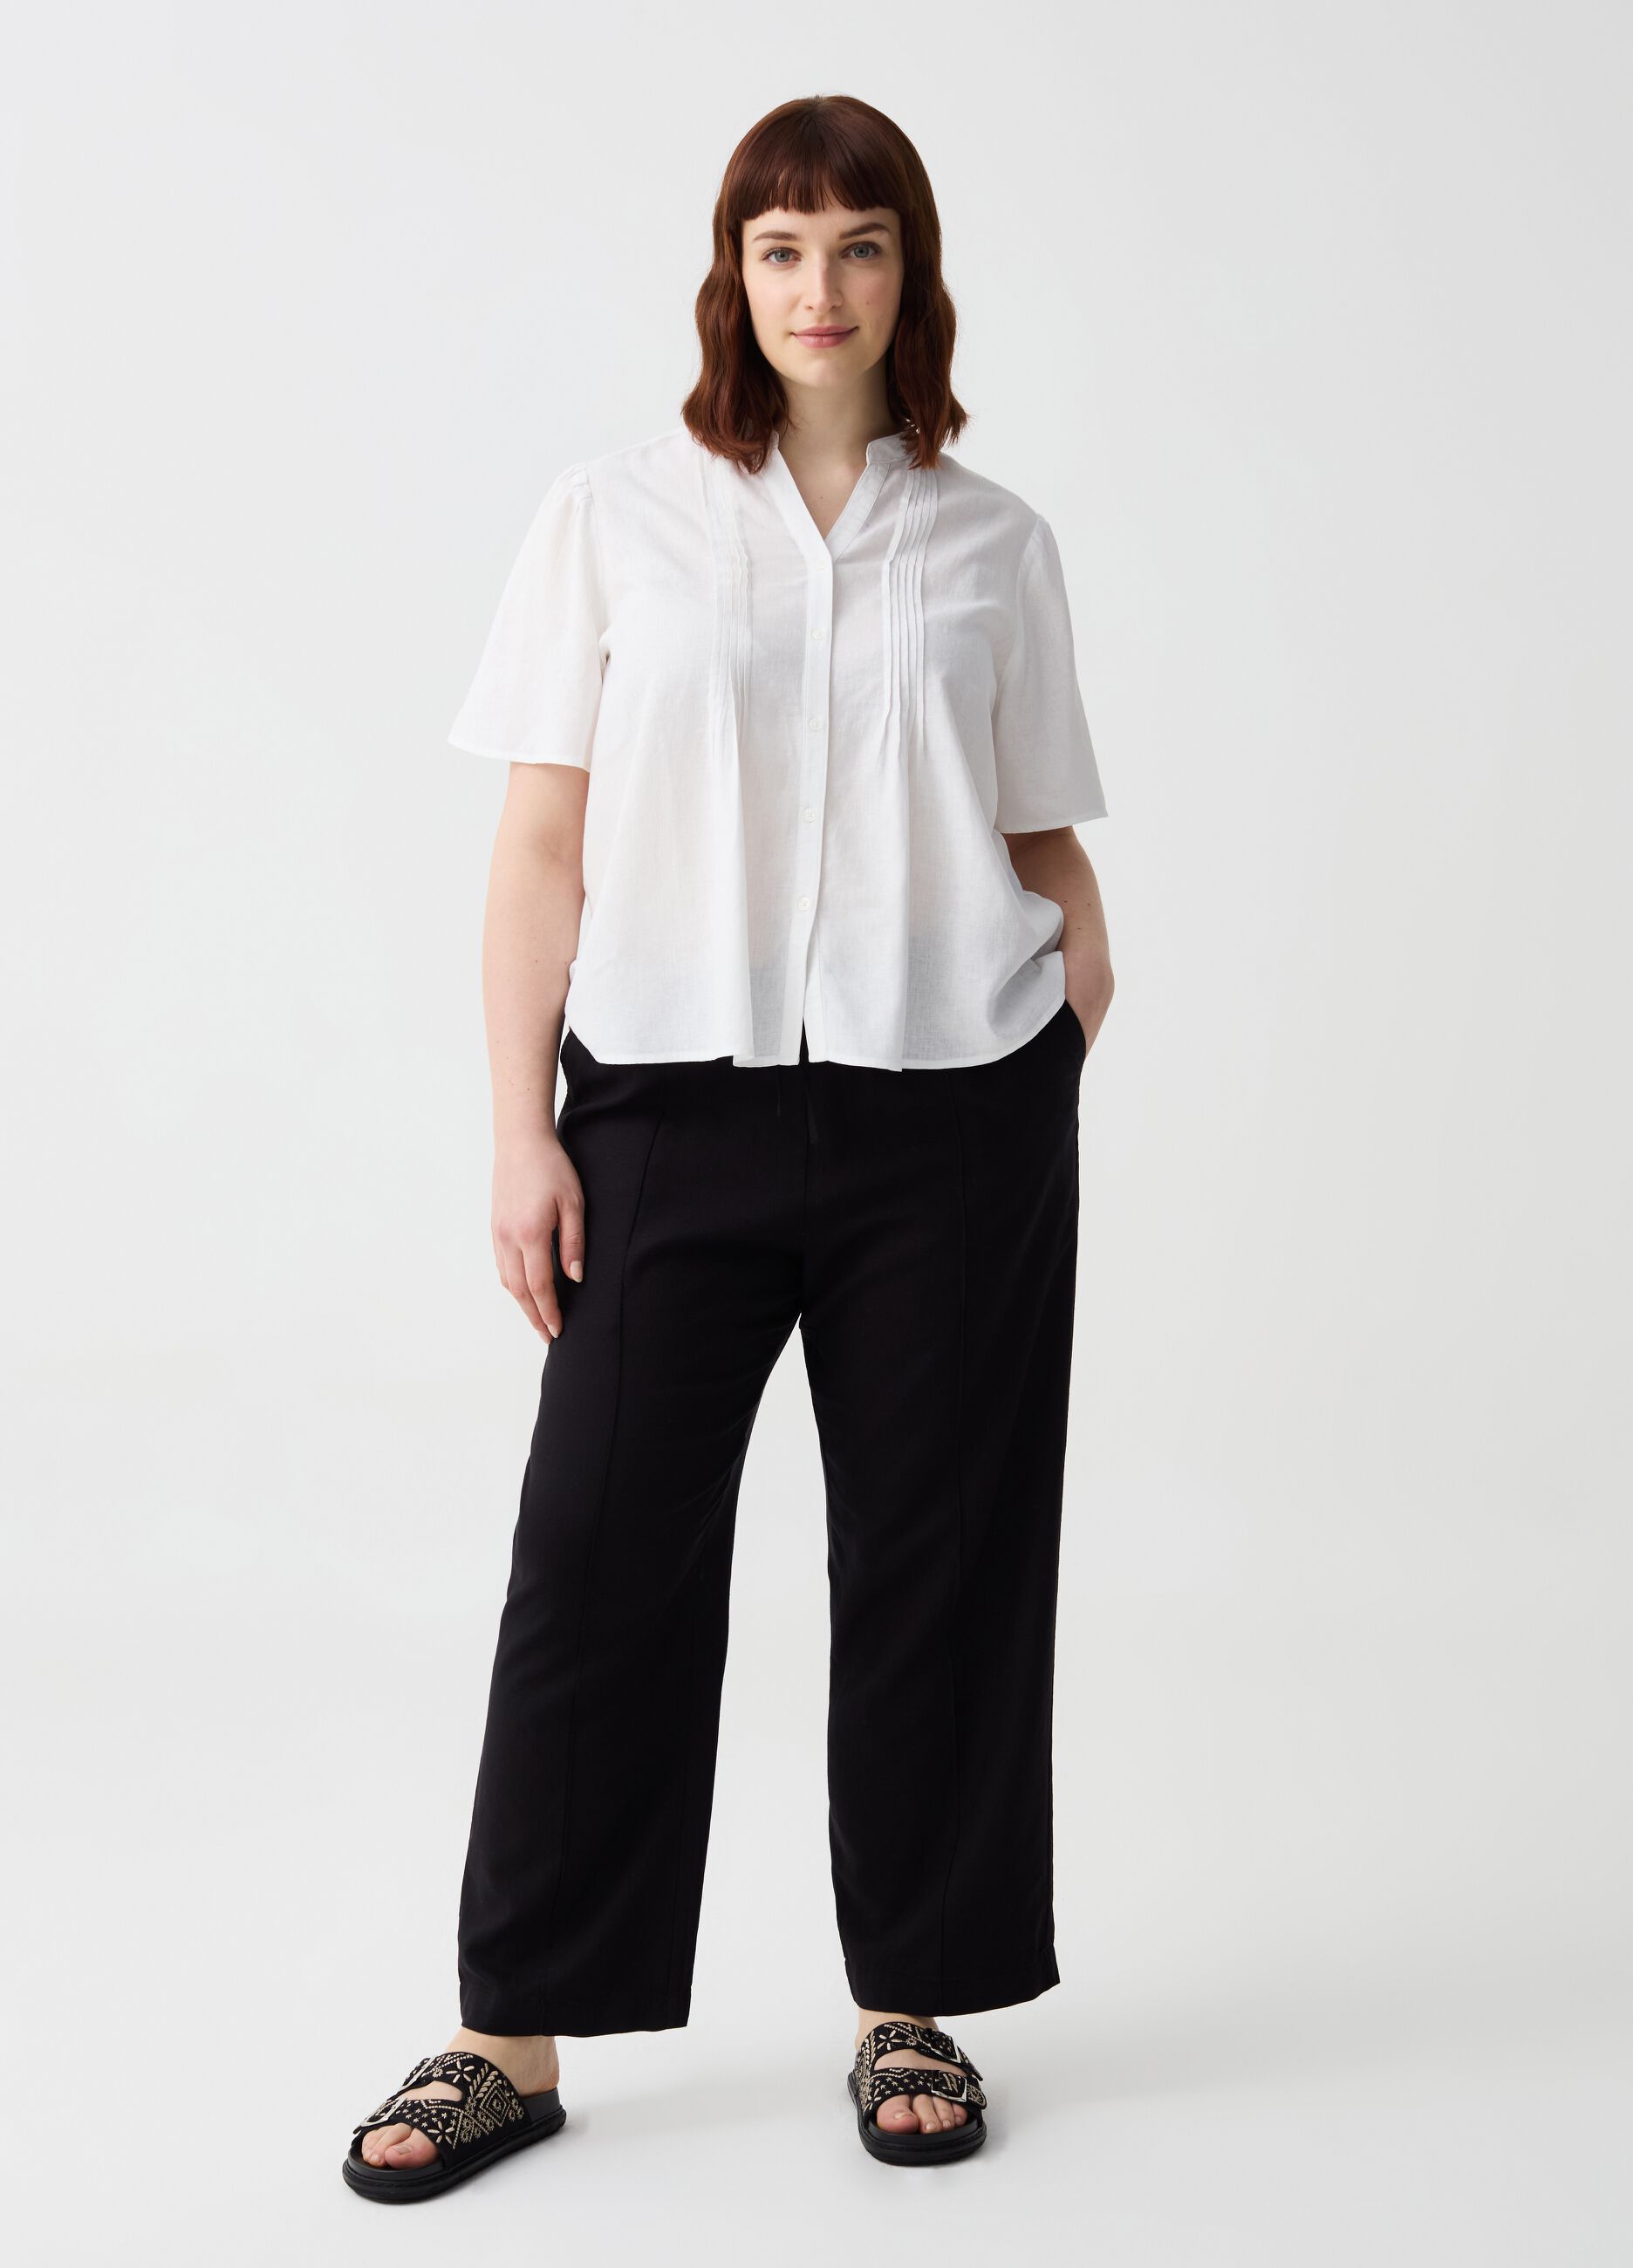 Curvy wide-leg trousers in viscose and linen